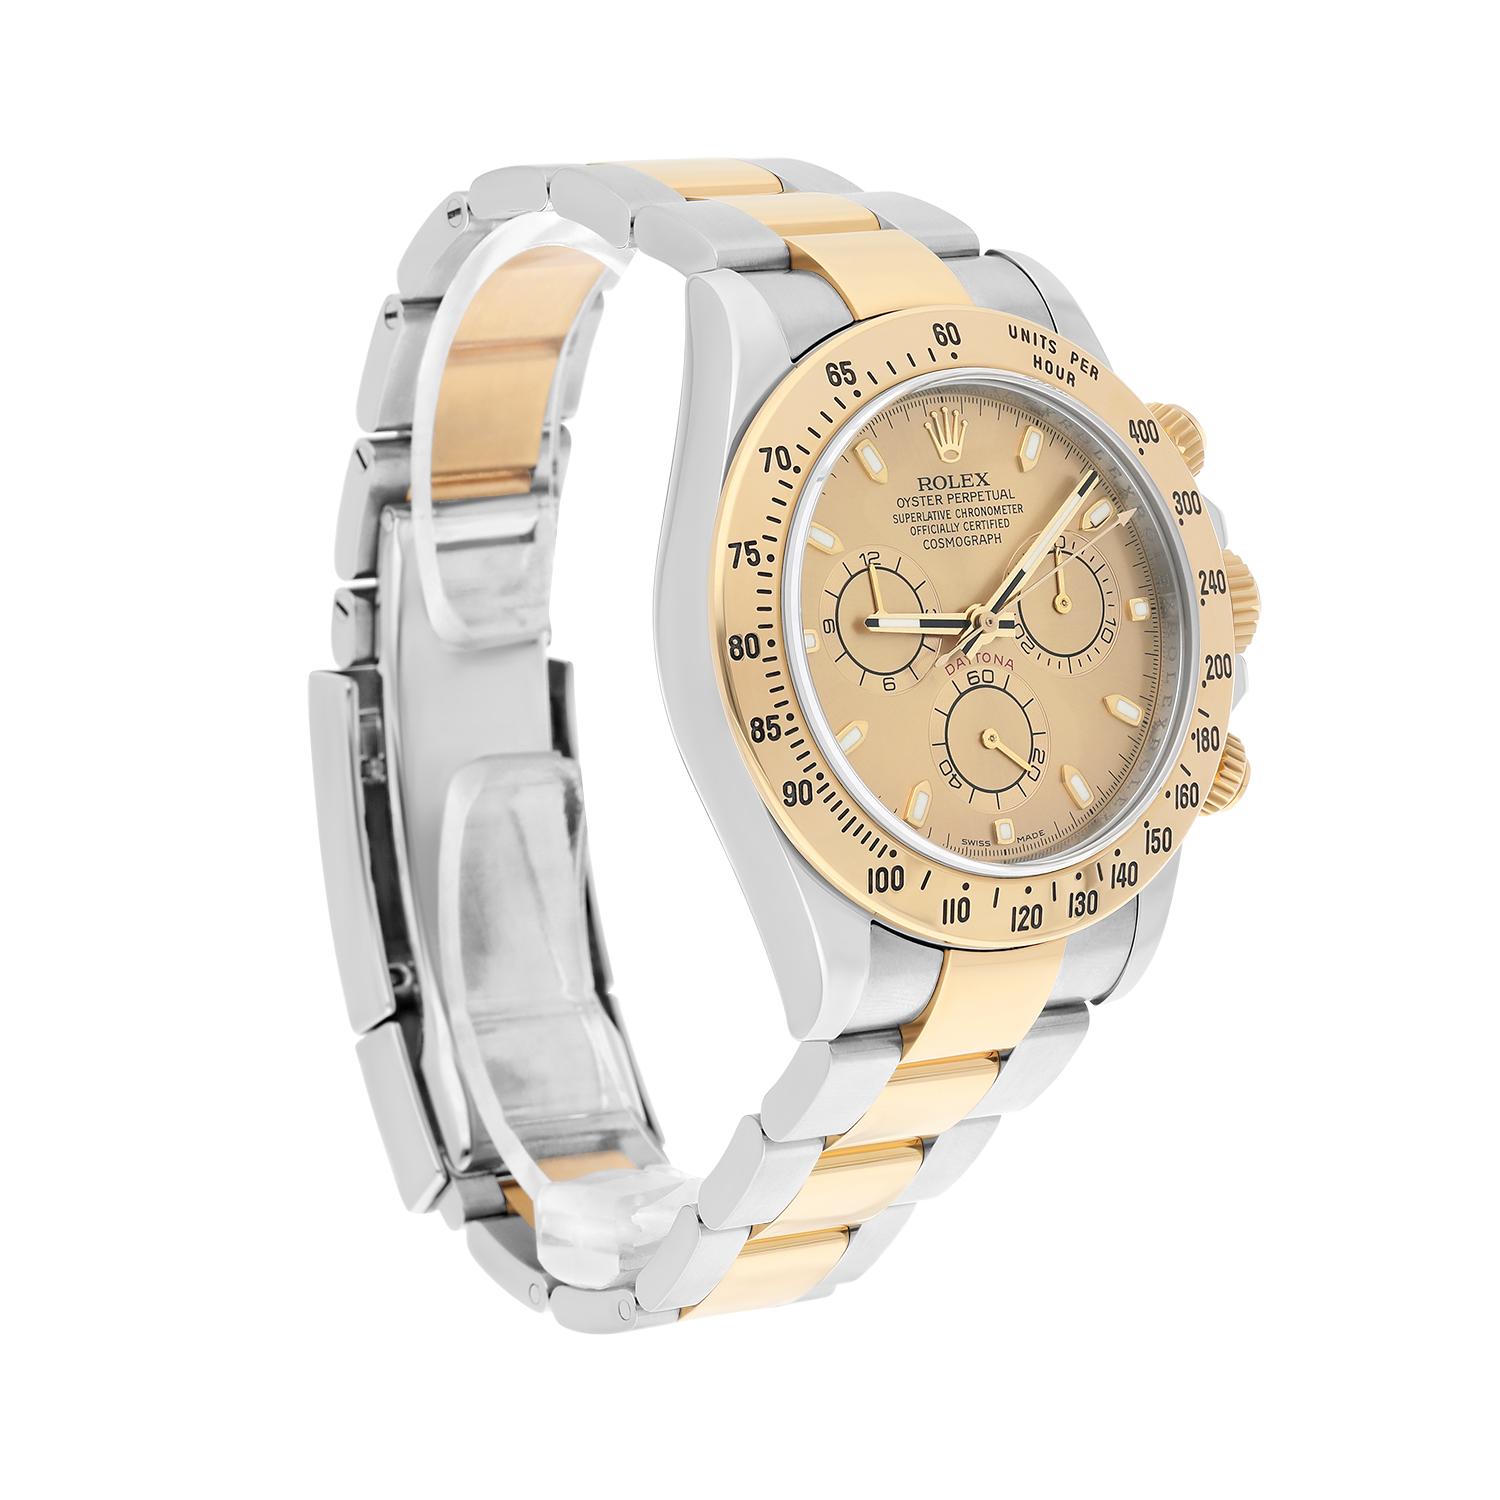 Modern Rolex Daytona Stainless Steel Yellow Gold Champagne Dial Mens Watch 116523 For Sale